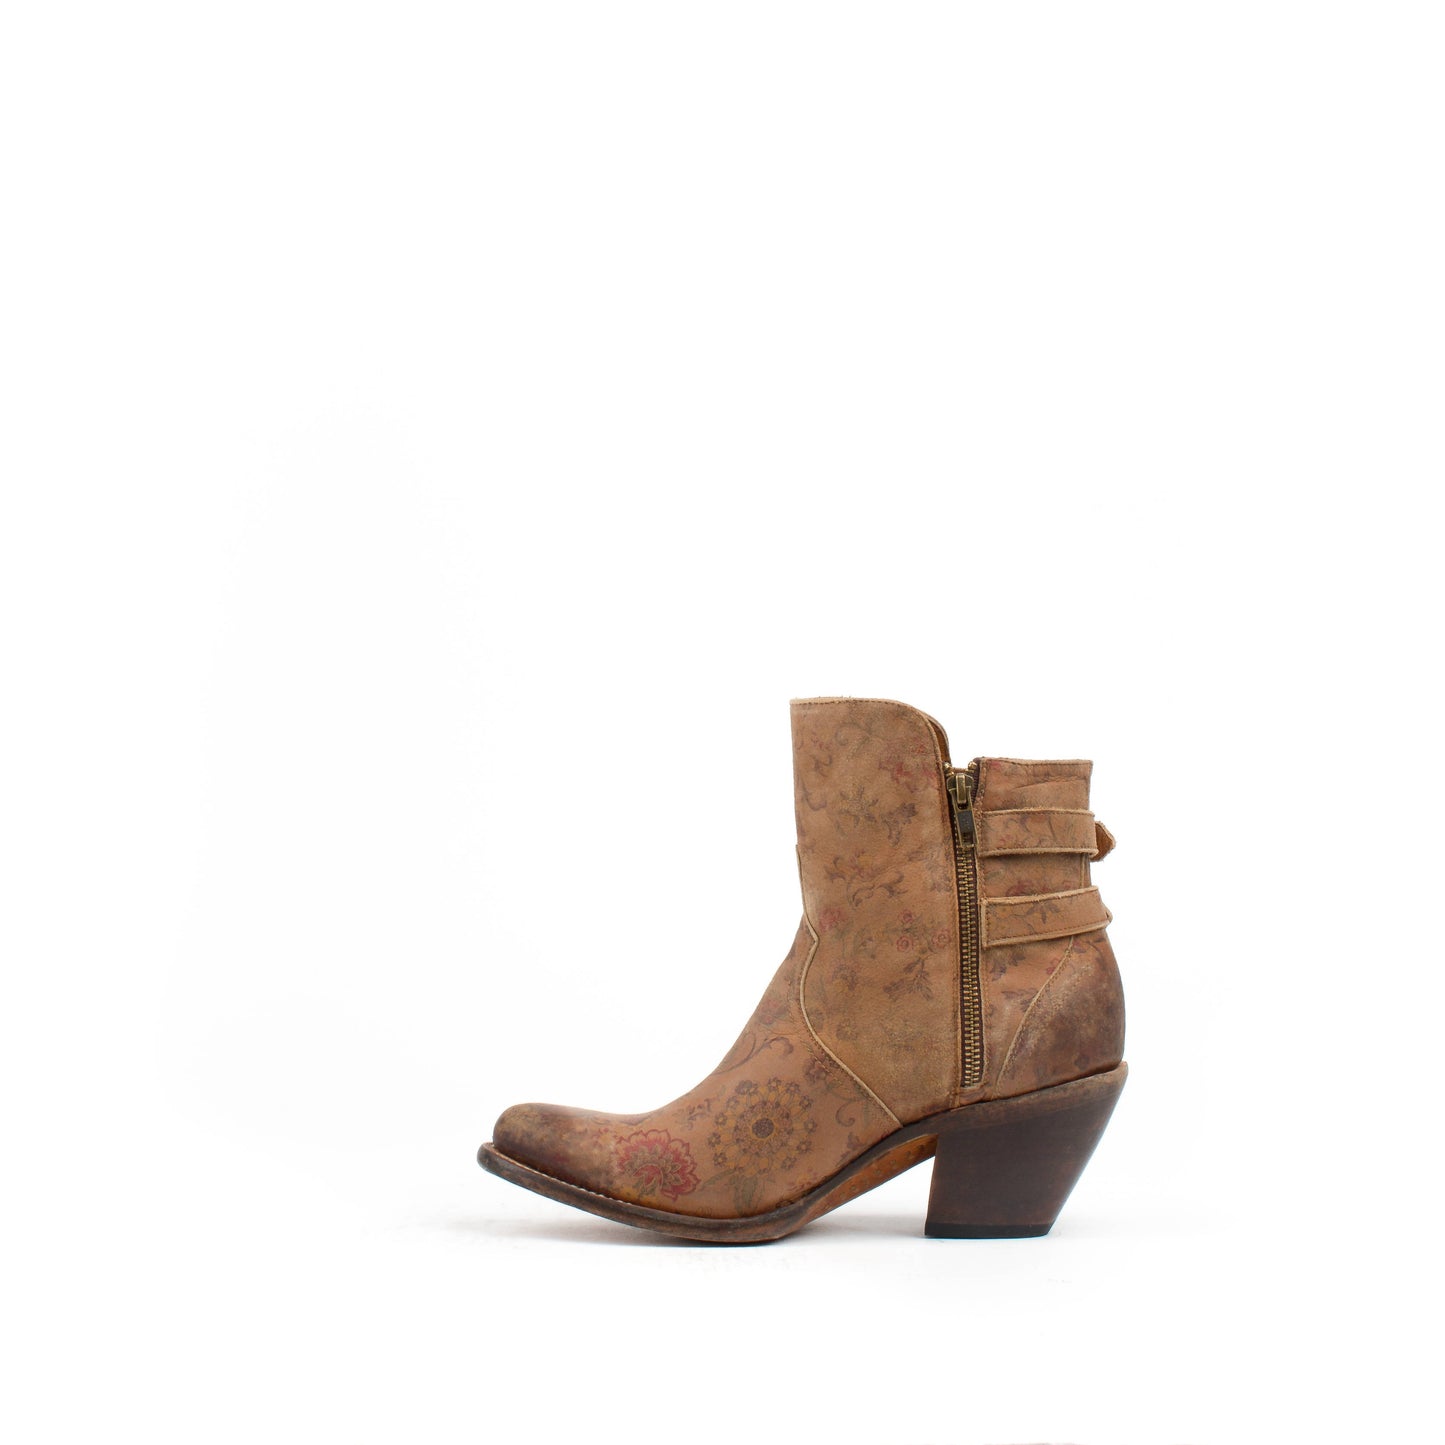 CATALINA FLORAL • Lucchese